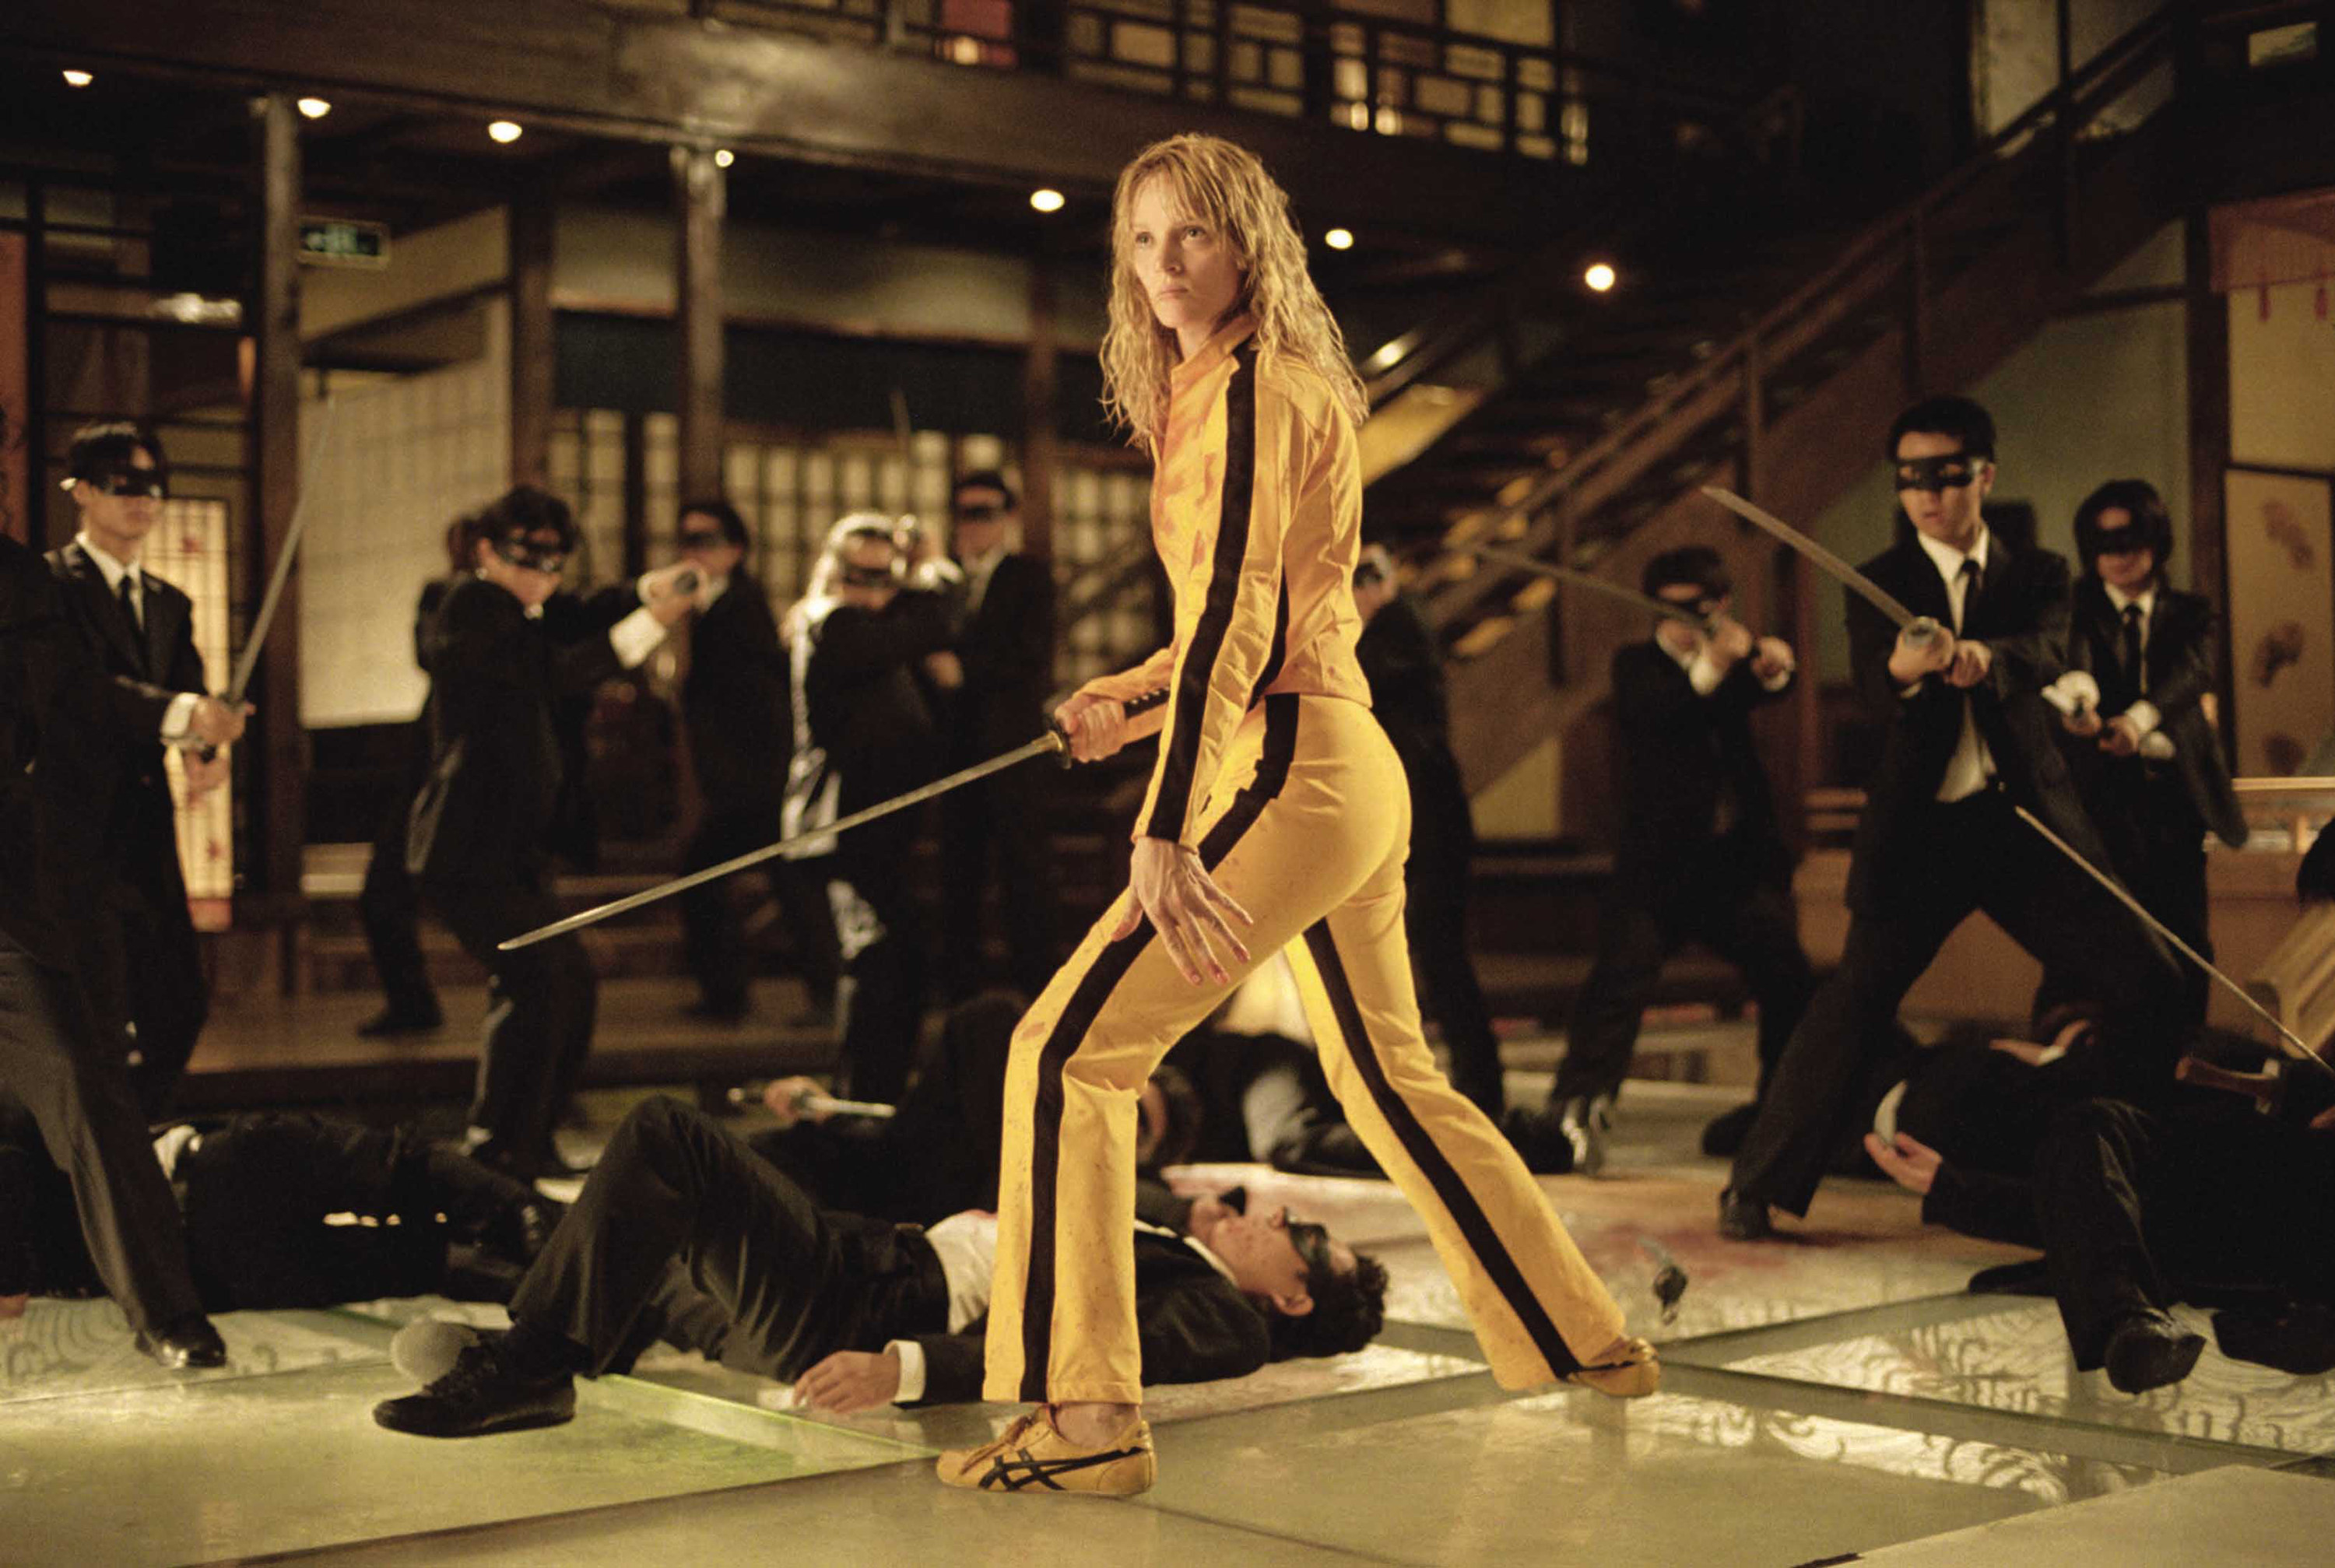 Uma Thurman in a yellow and black jumpsuit holds a samurai sword near a number of assailants